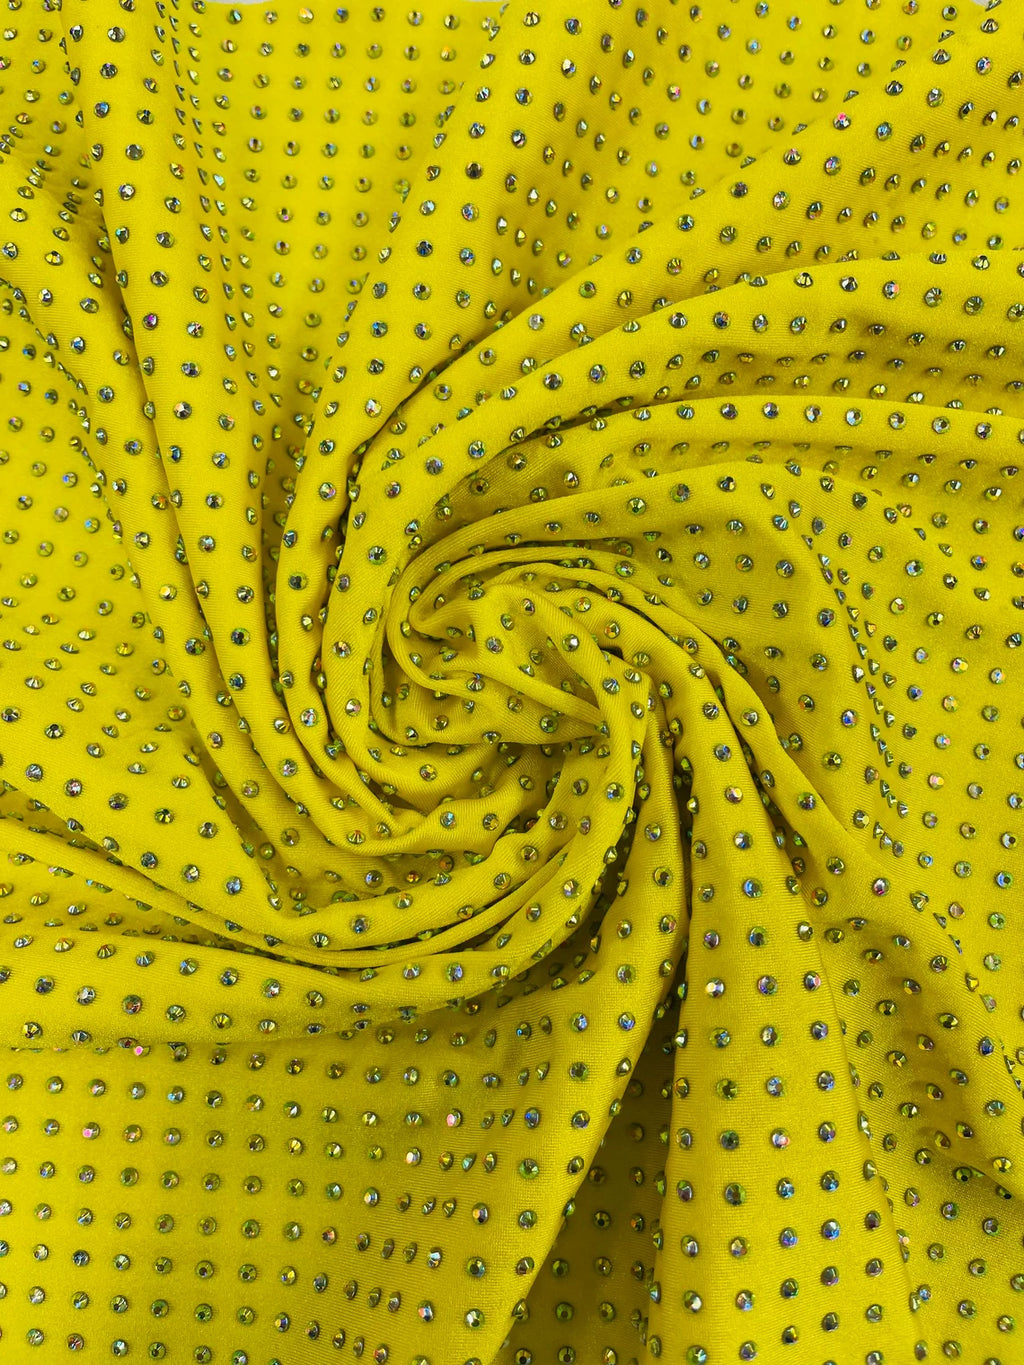 Solid Color Rhinestone Fabric - Yellow - 4 Way Stretch Soft Solid Colo